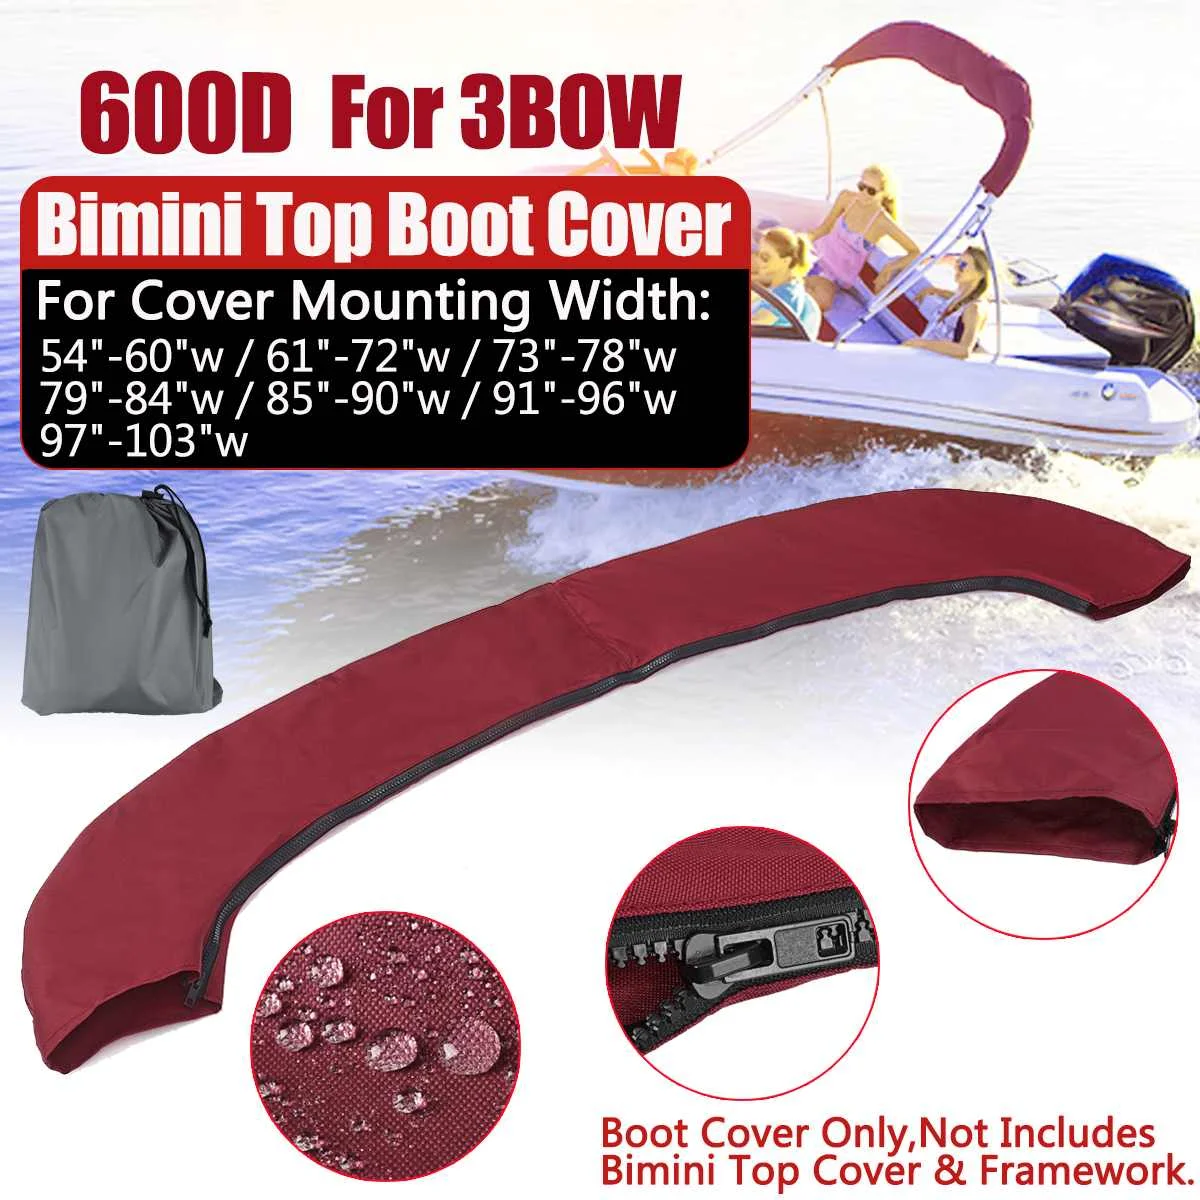 3 BOW Bimini Top Boot Cover No Frame with Zipper Boat Cover 600D Waterproof Anti UV Dustproof Marine Cover Boat Accessories